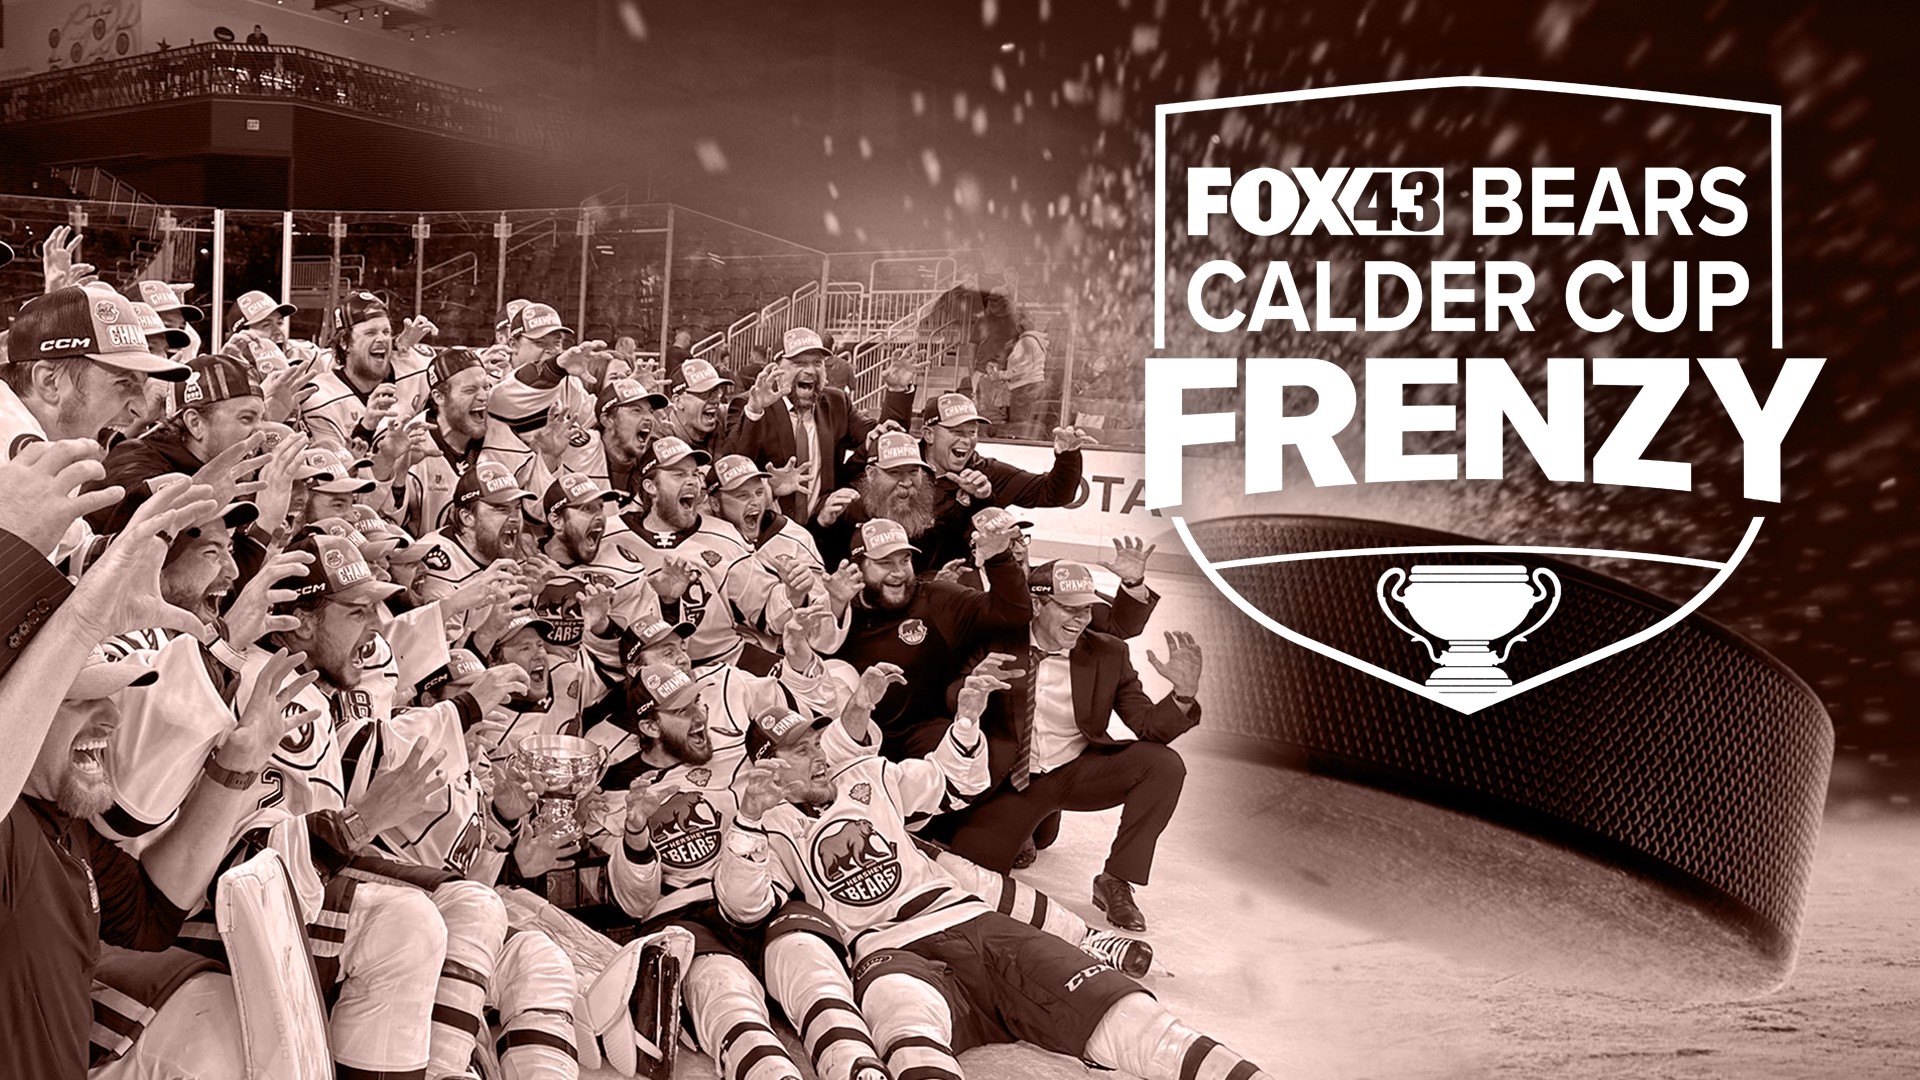 WPMT-FOX43 wins award for outstanding coverage of Hershey Bears fox43